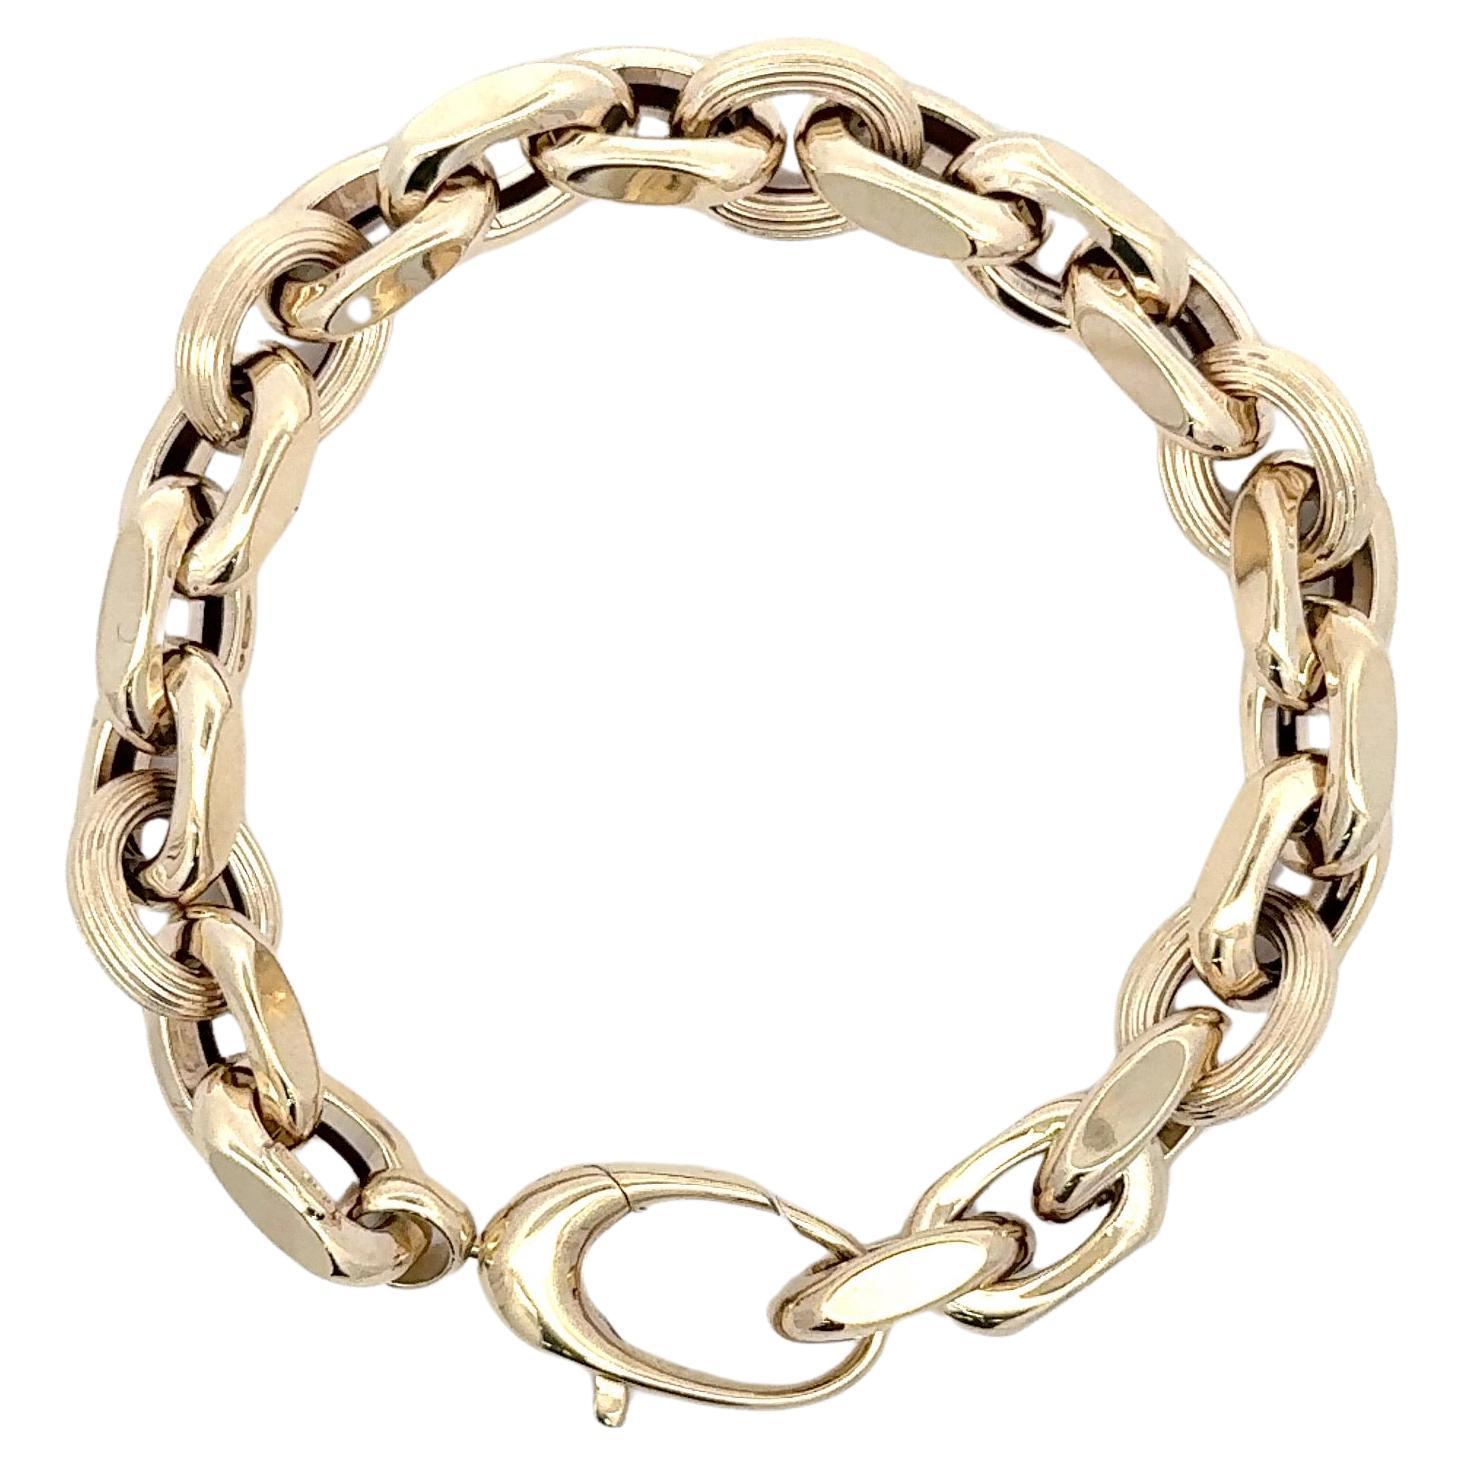 Contemporary Italian 14 Karat Yellow Gold Oval Textured & High Polished Link Bracelet 11.4 GR For Sale